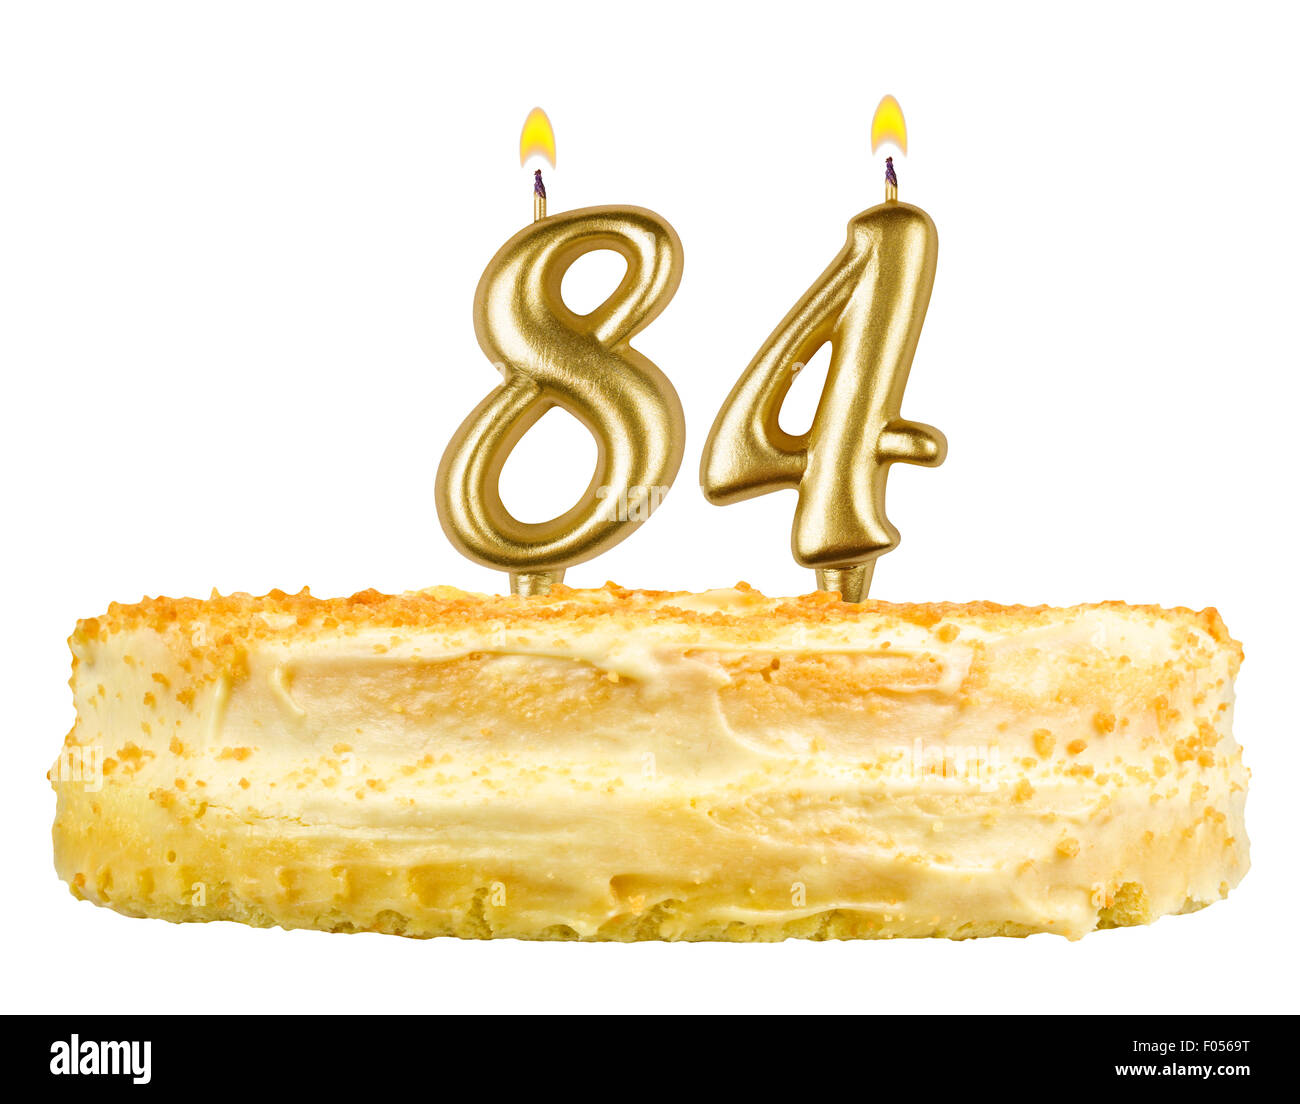 birthday cake with candles number eighty four isolated on white background Stock Photo